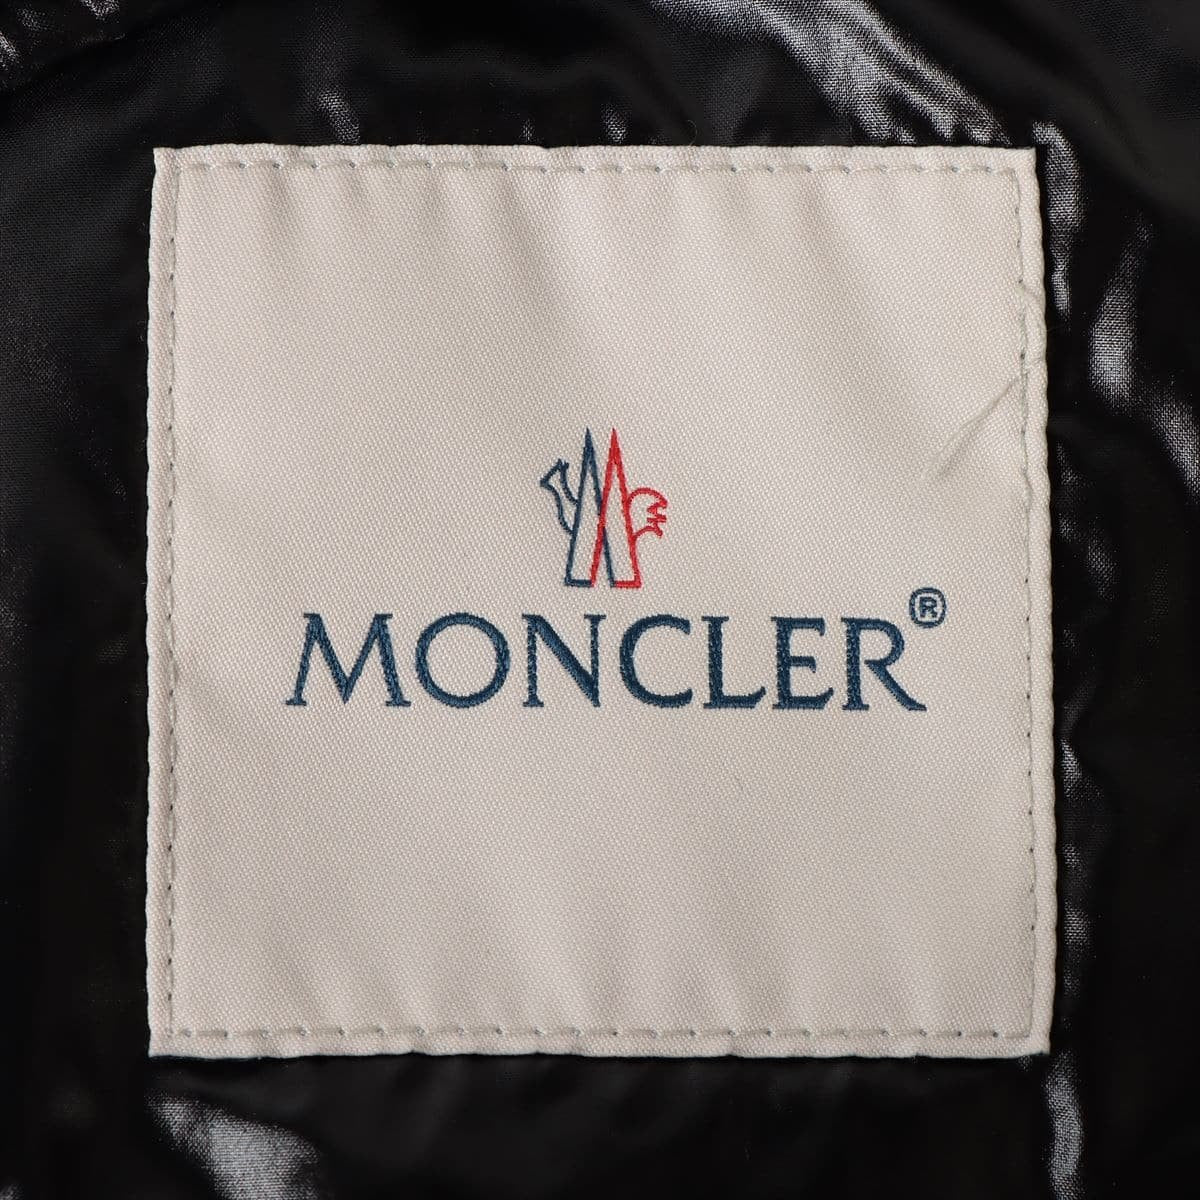 Moncler Genius 1952 18 years Polyester & nylon Down jacket 3 Black  MARENNES Total handle Pocket side sleeves Dirt on the back of the sleeve